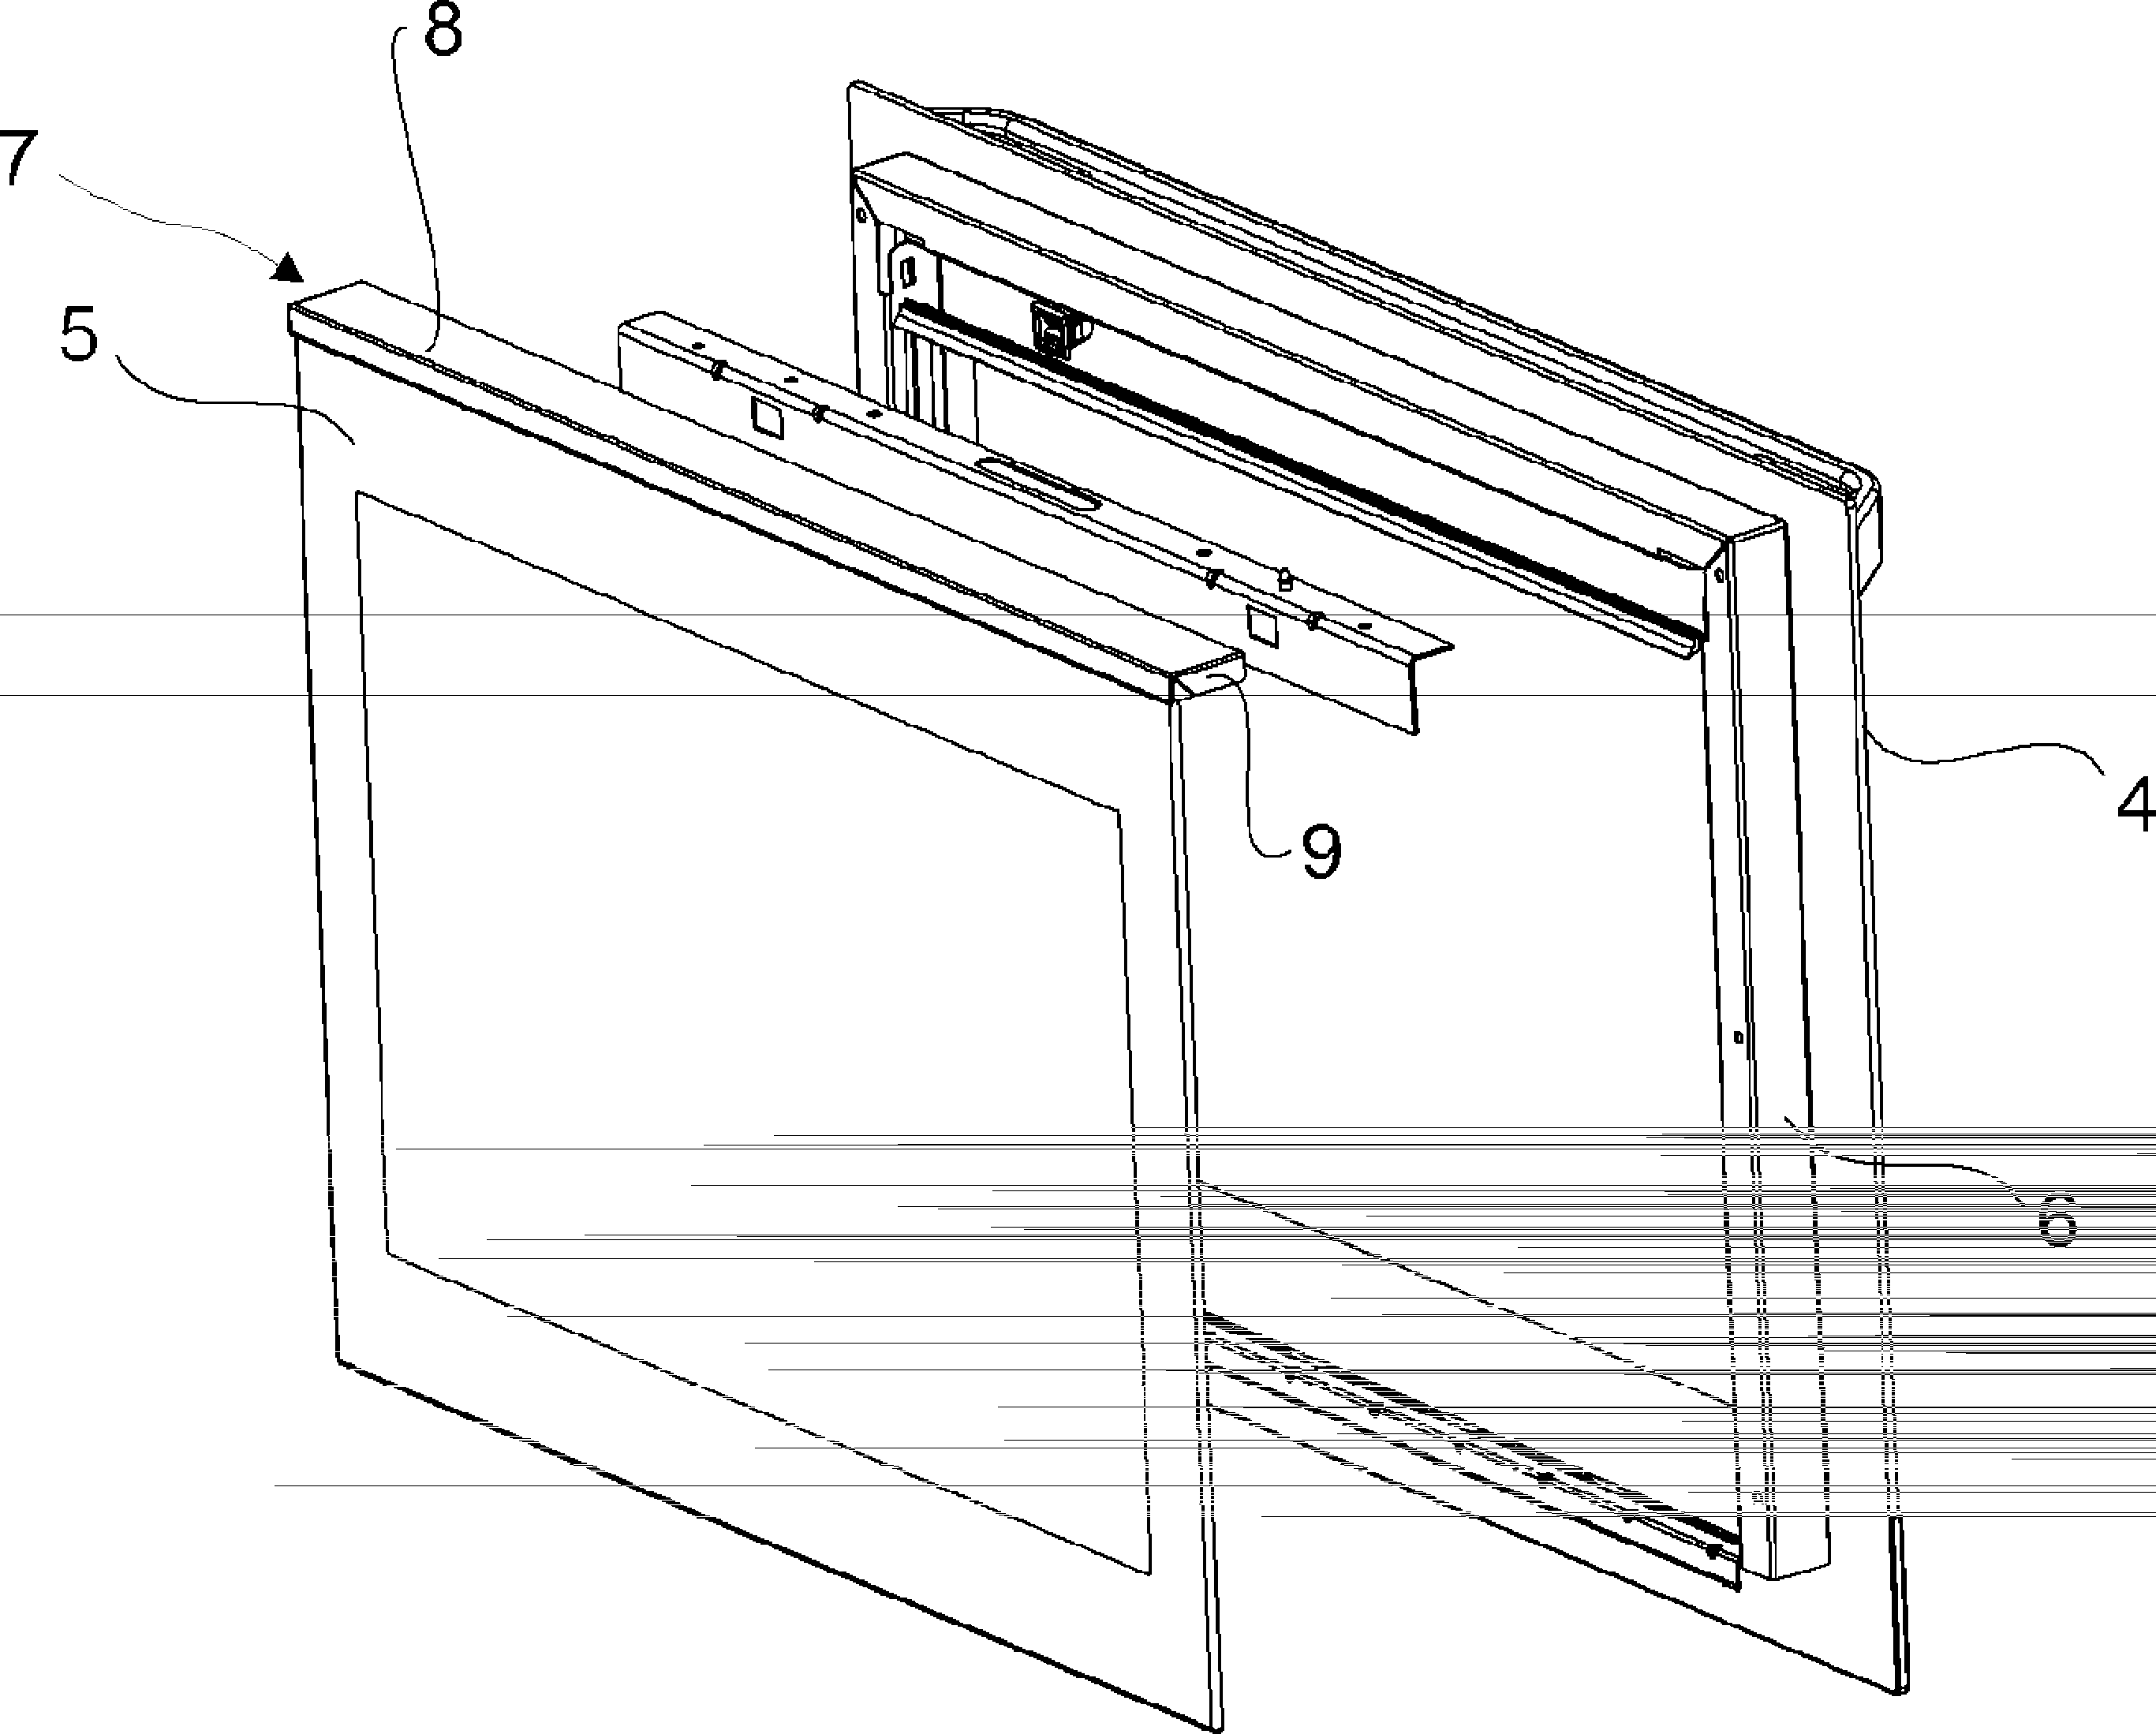 A cooking device comprising a covering member